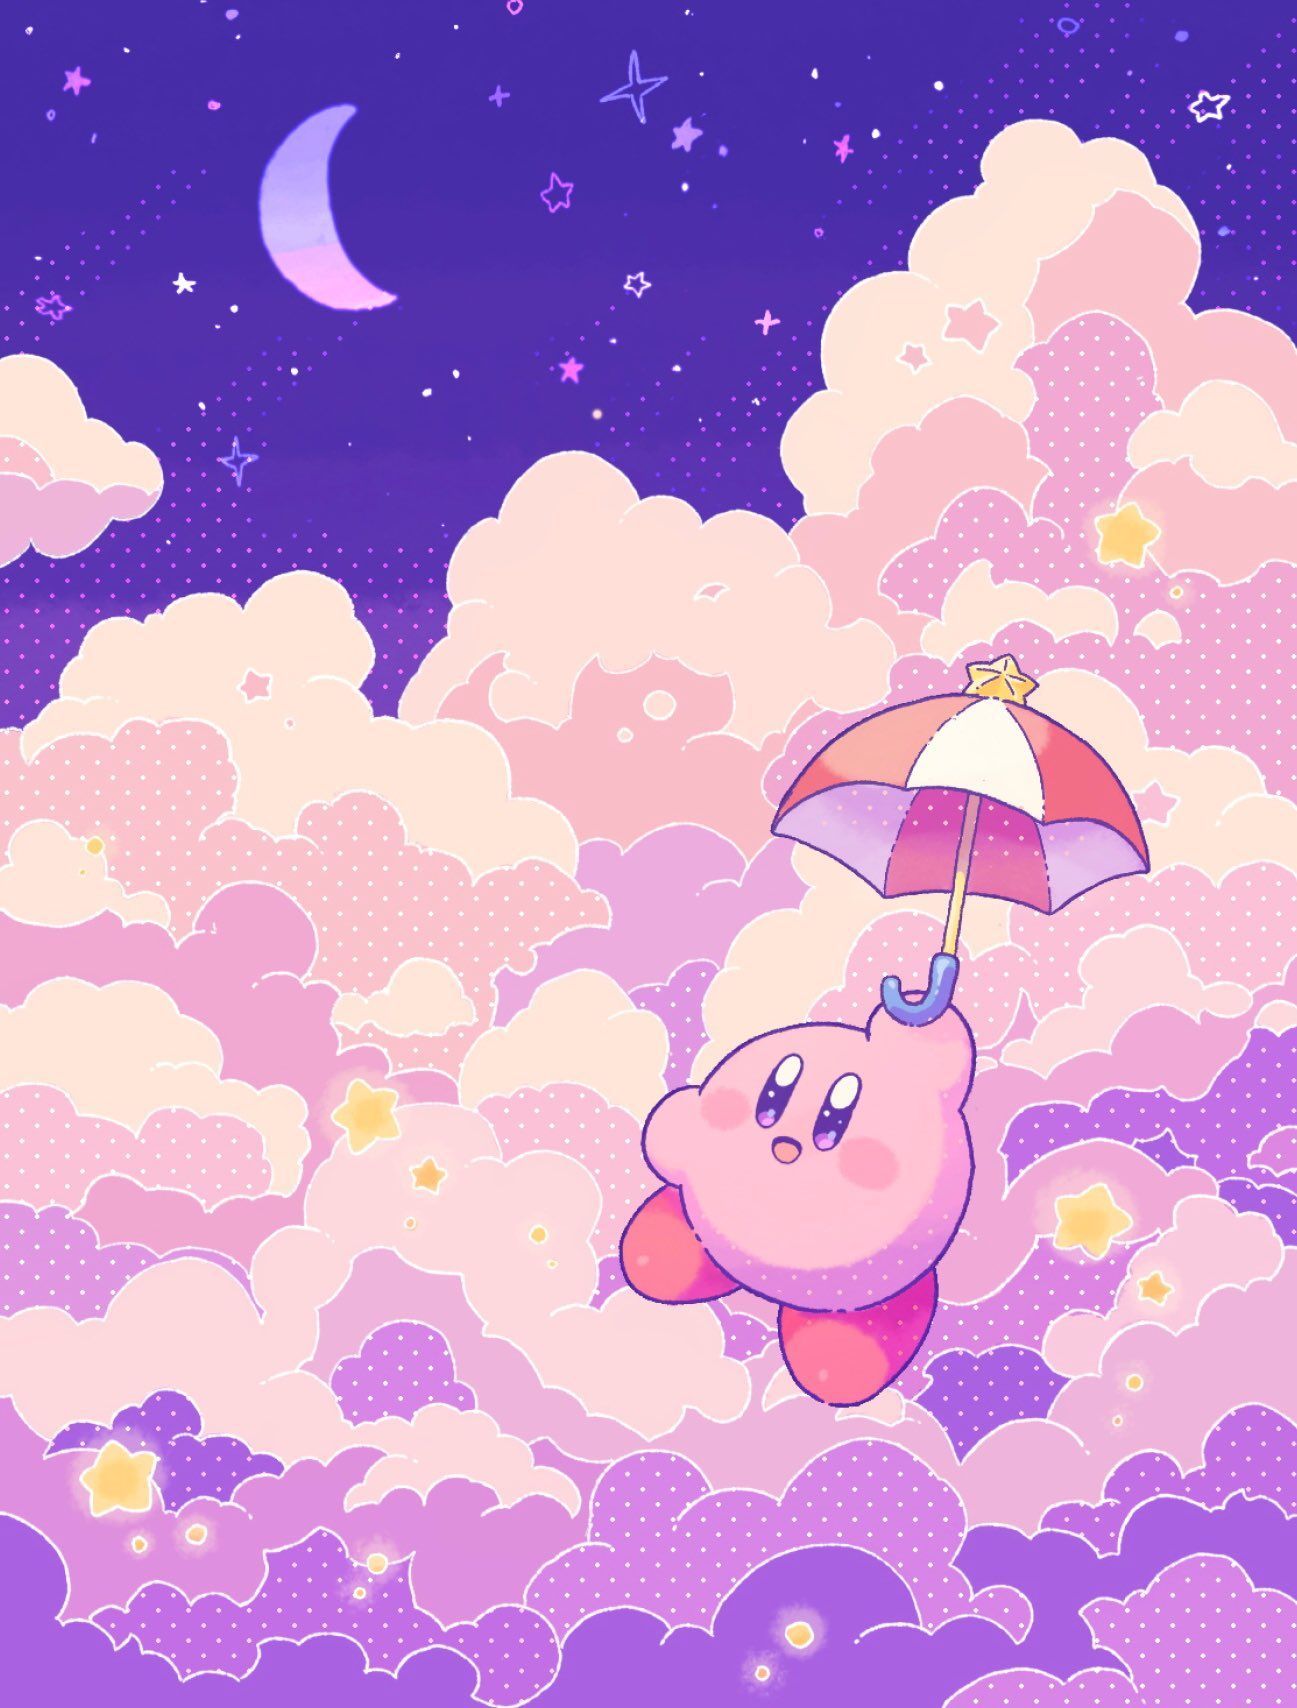 Download Latest Free Desktop HD Wallpapers of  Games Kirby